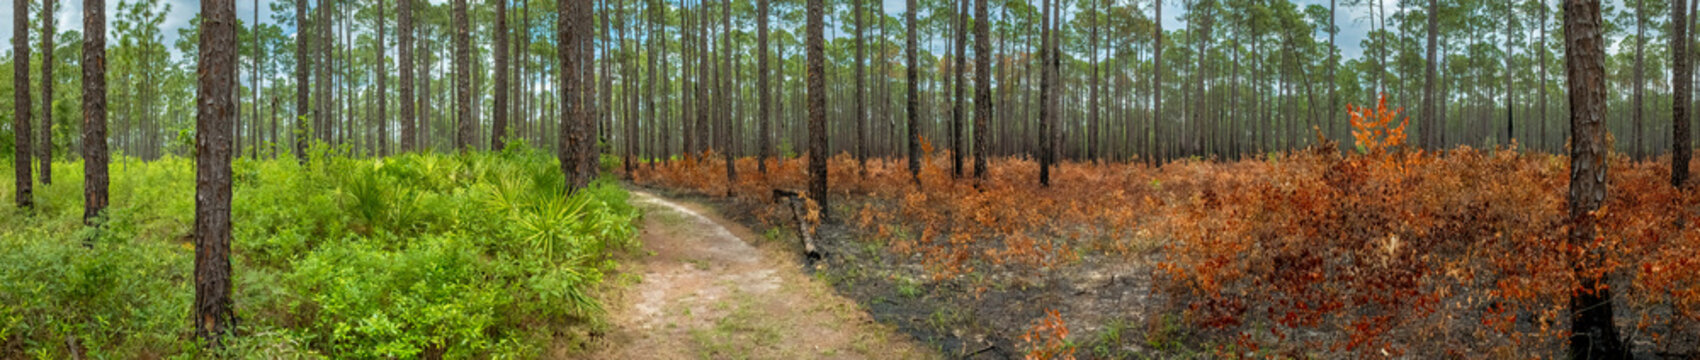 Pine Forest with Controlled Burn on One Side, Southern Georgia